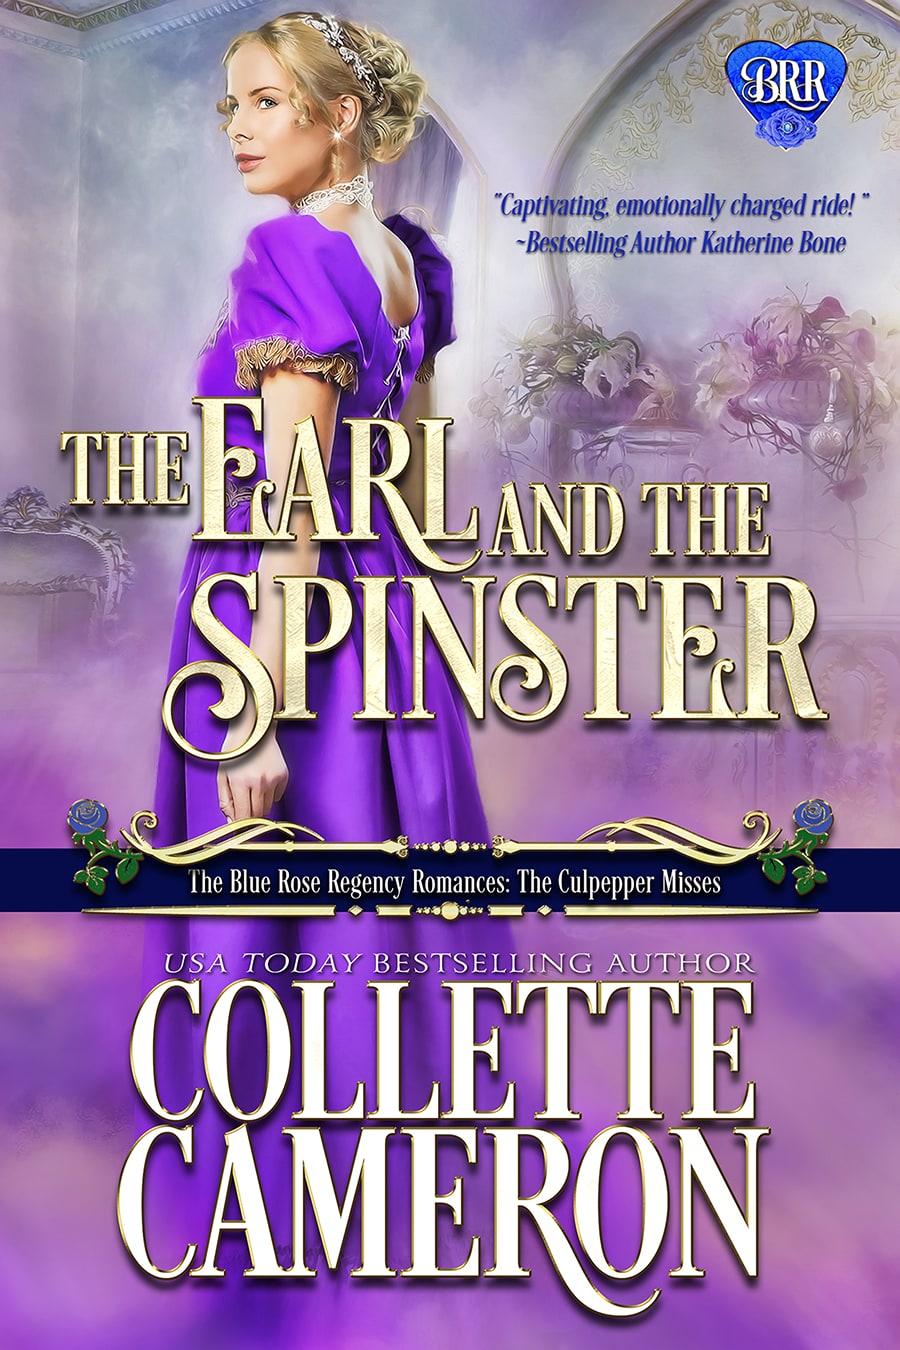 The Earl and the Spinster is only 99¢!